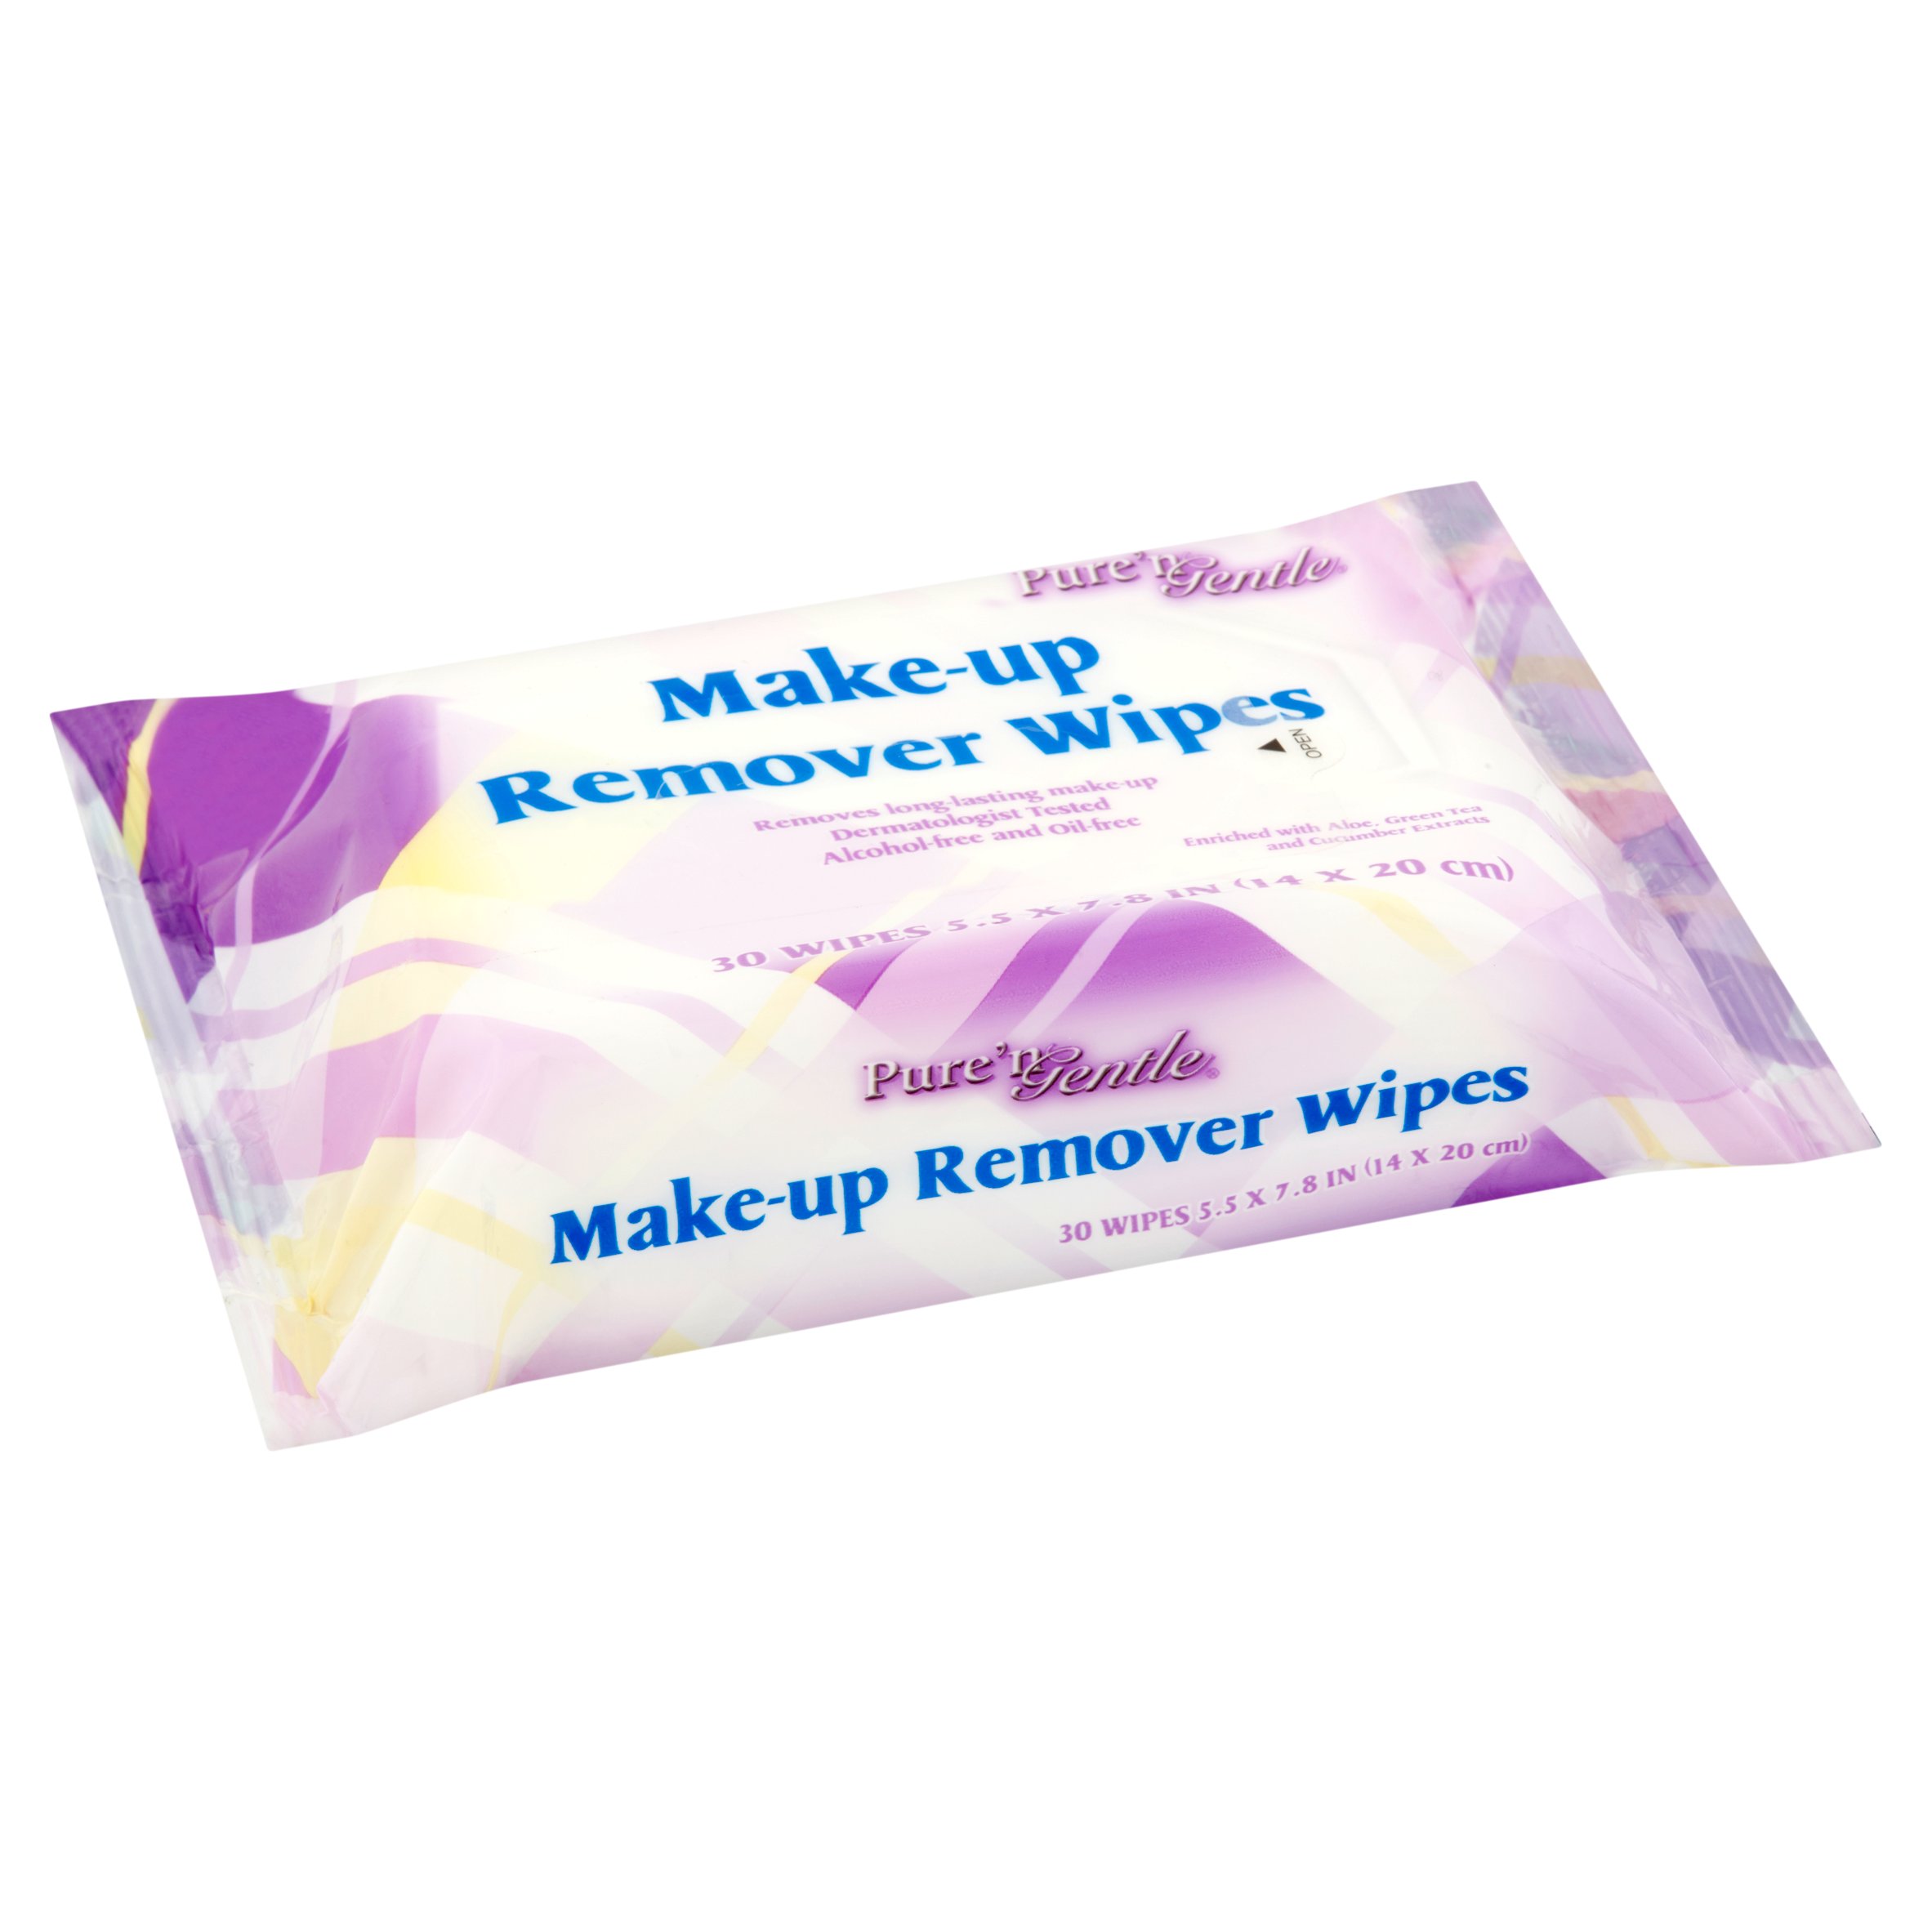 Pure'n Gentle Make-up Remover Wipes, 30 Count - image 2 of 4